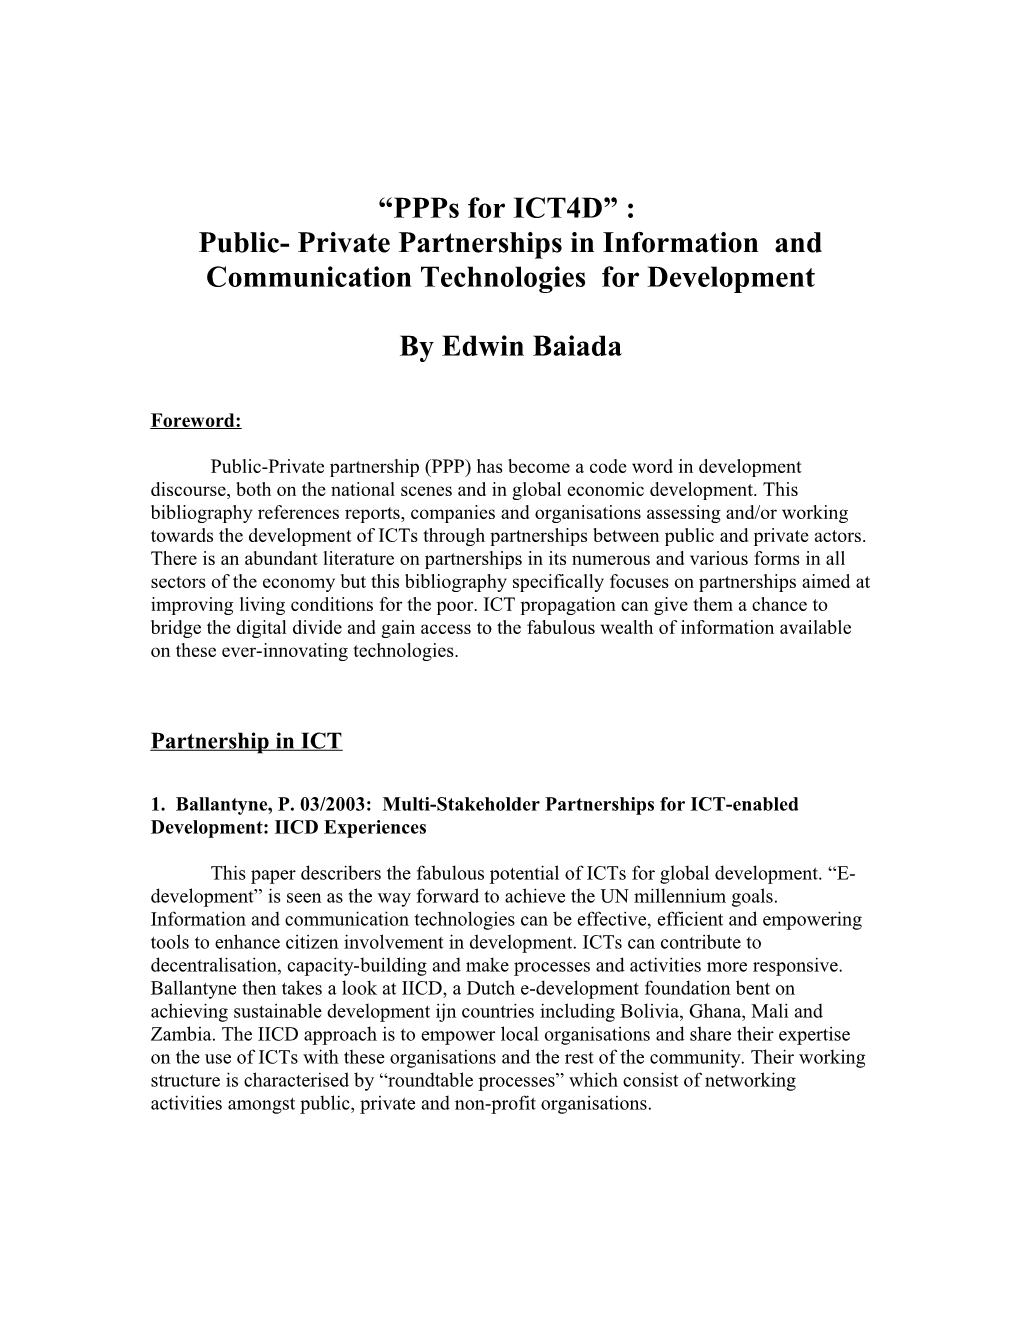 Public- Private Partnerships in Information and Communication Technologies for Development